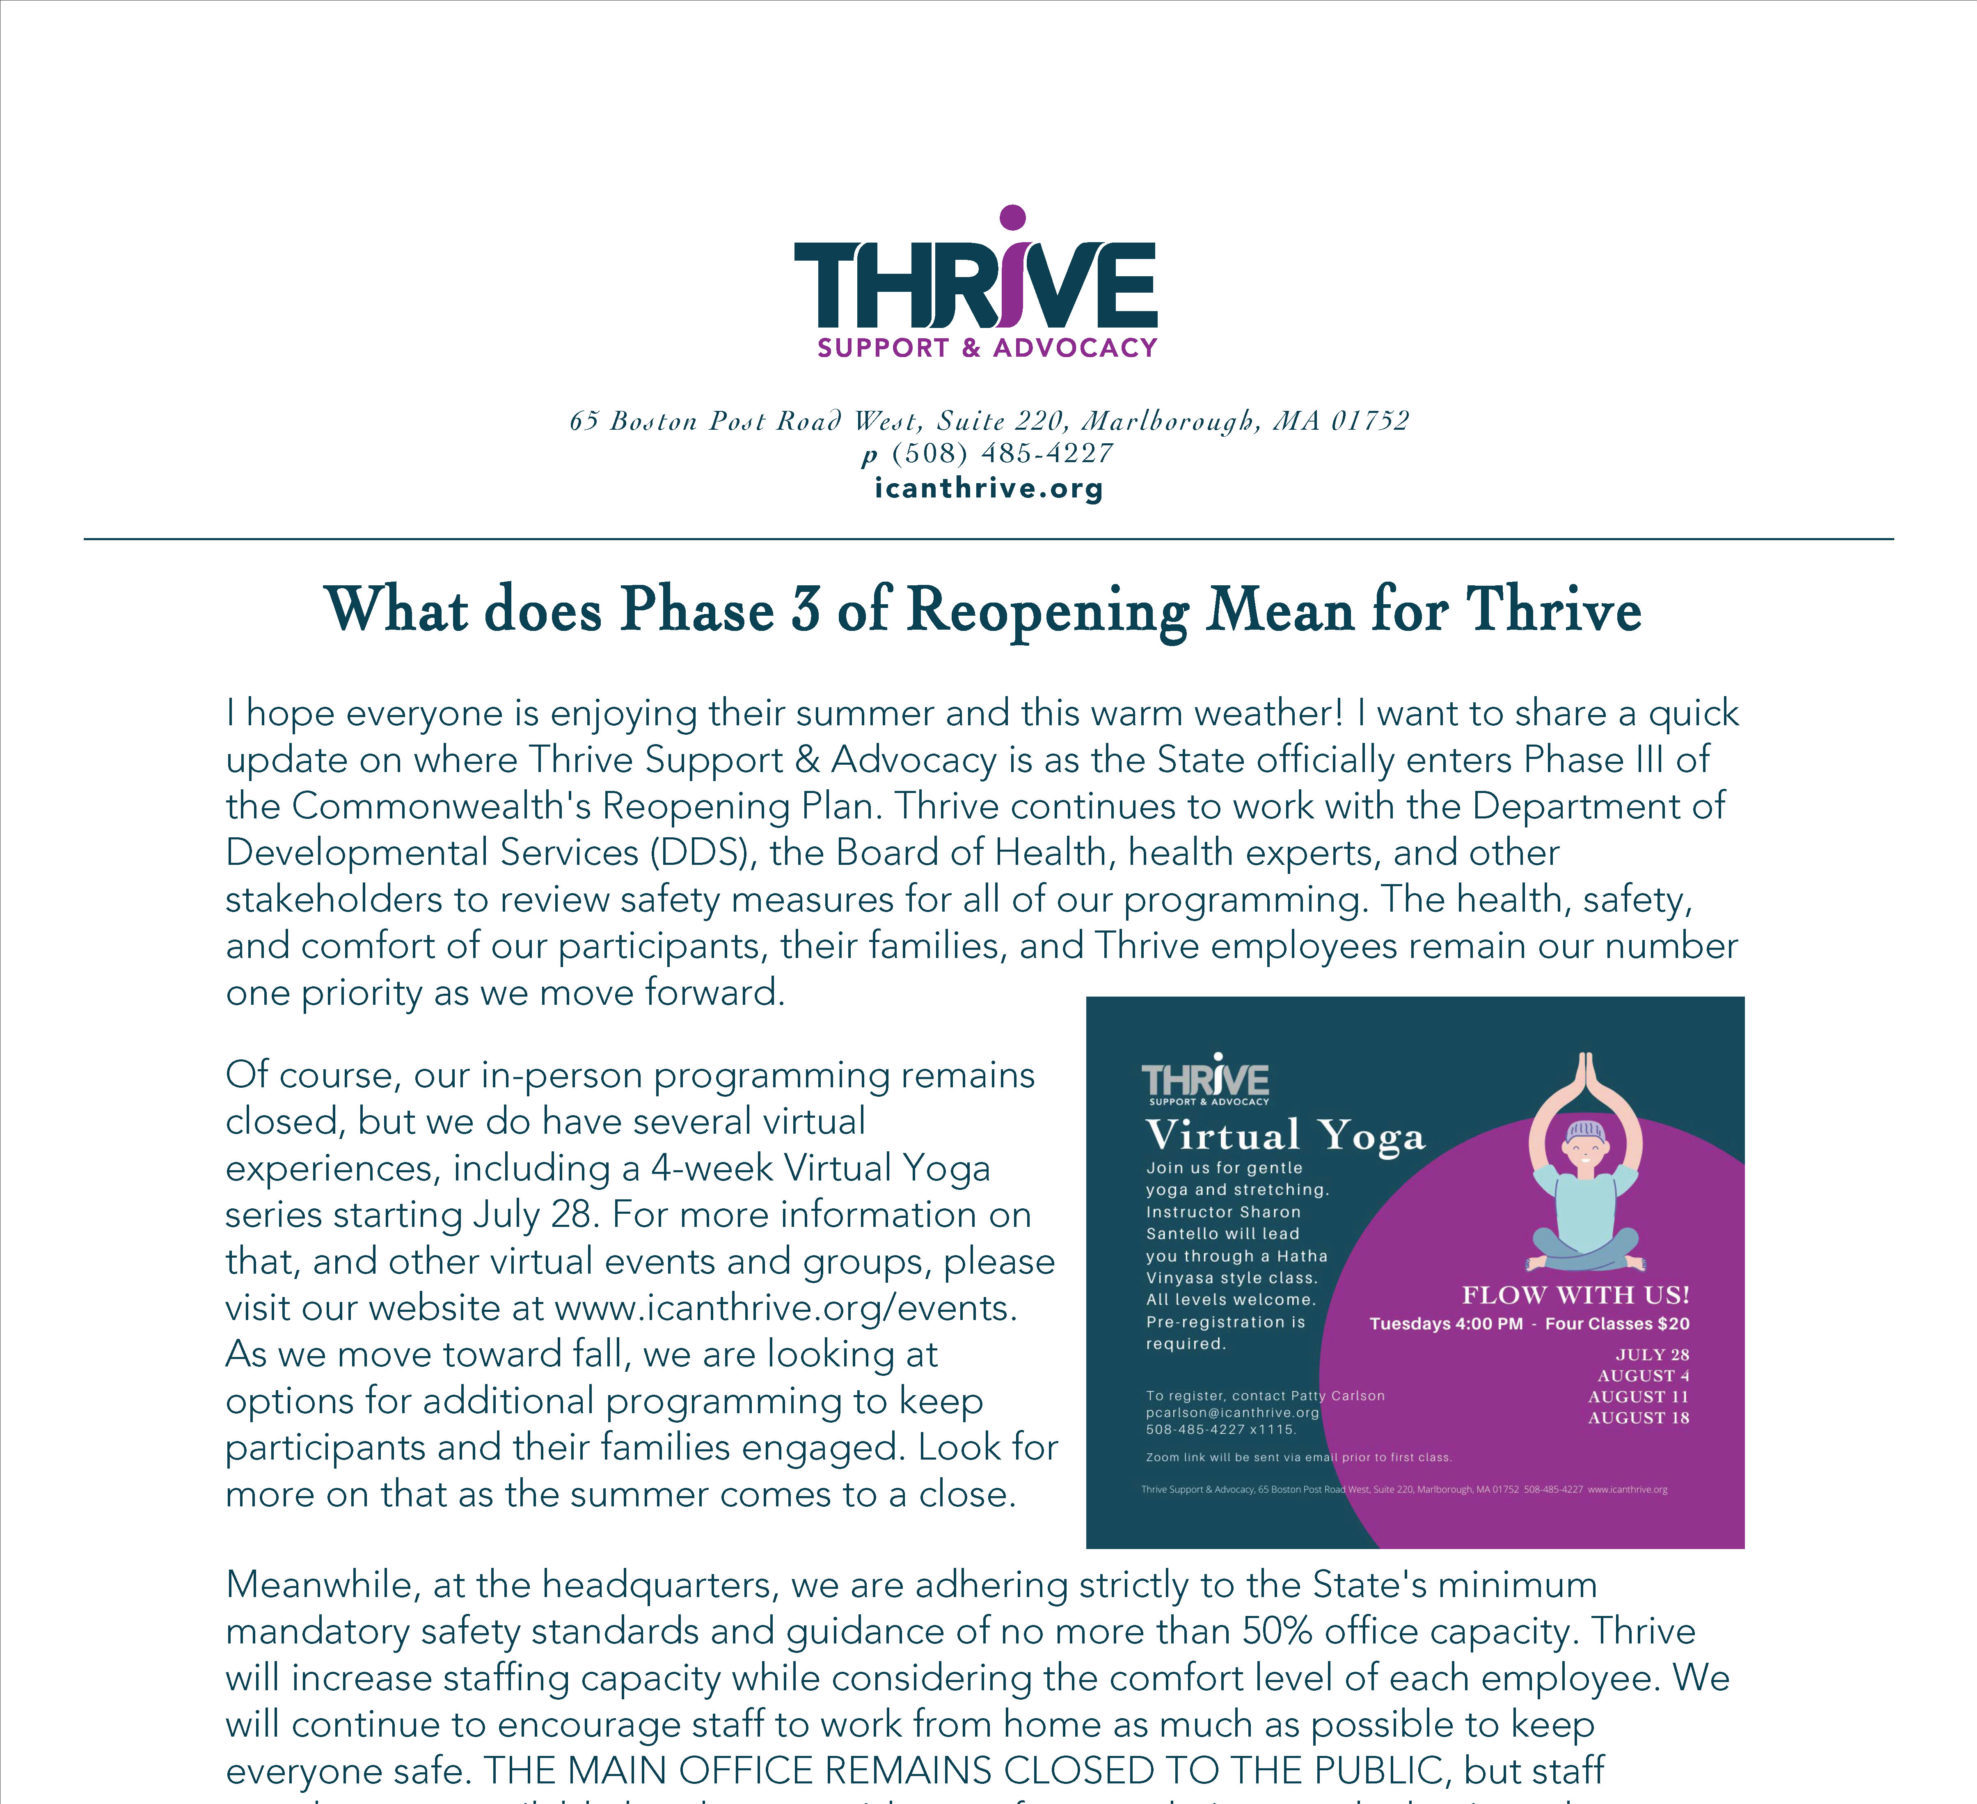 thrive meaning